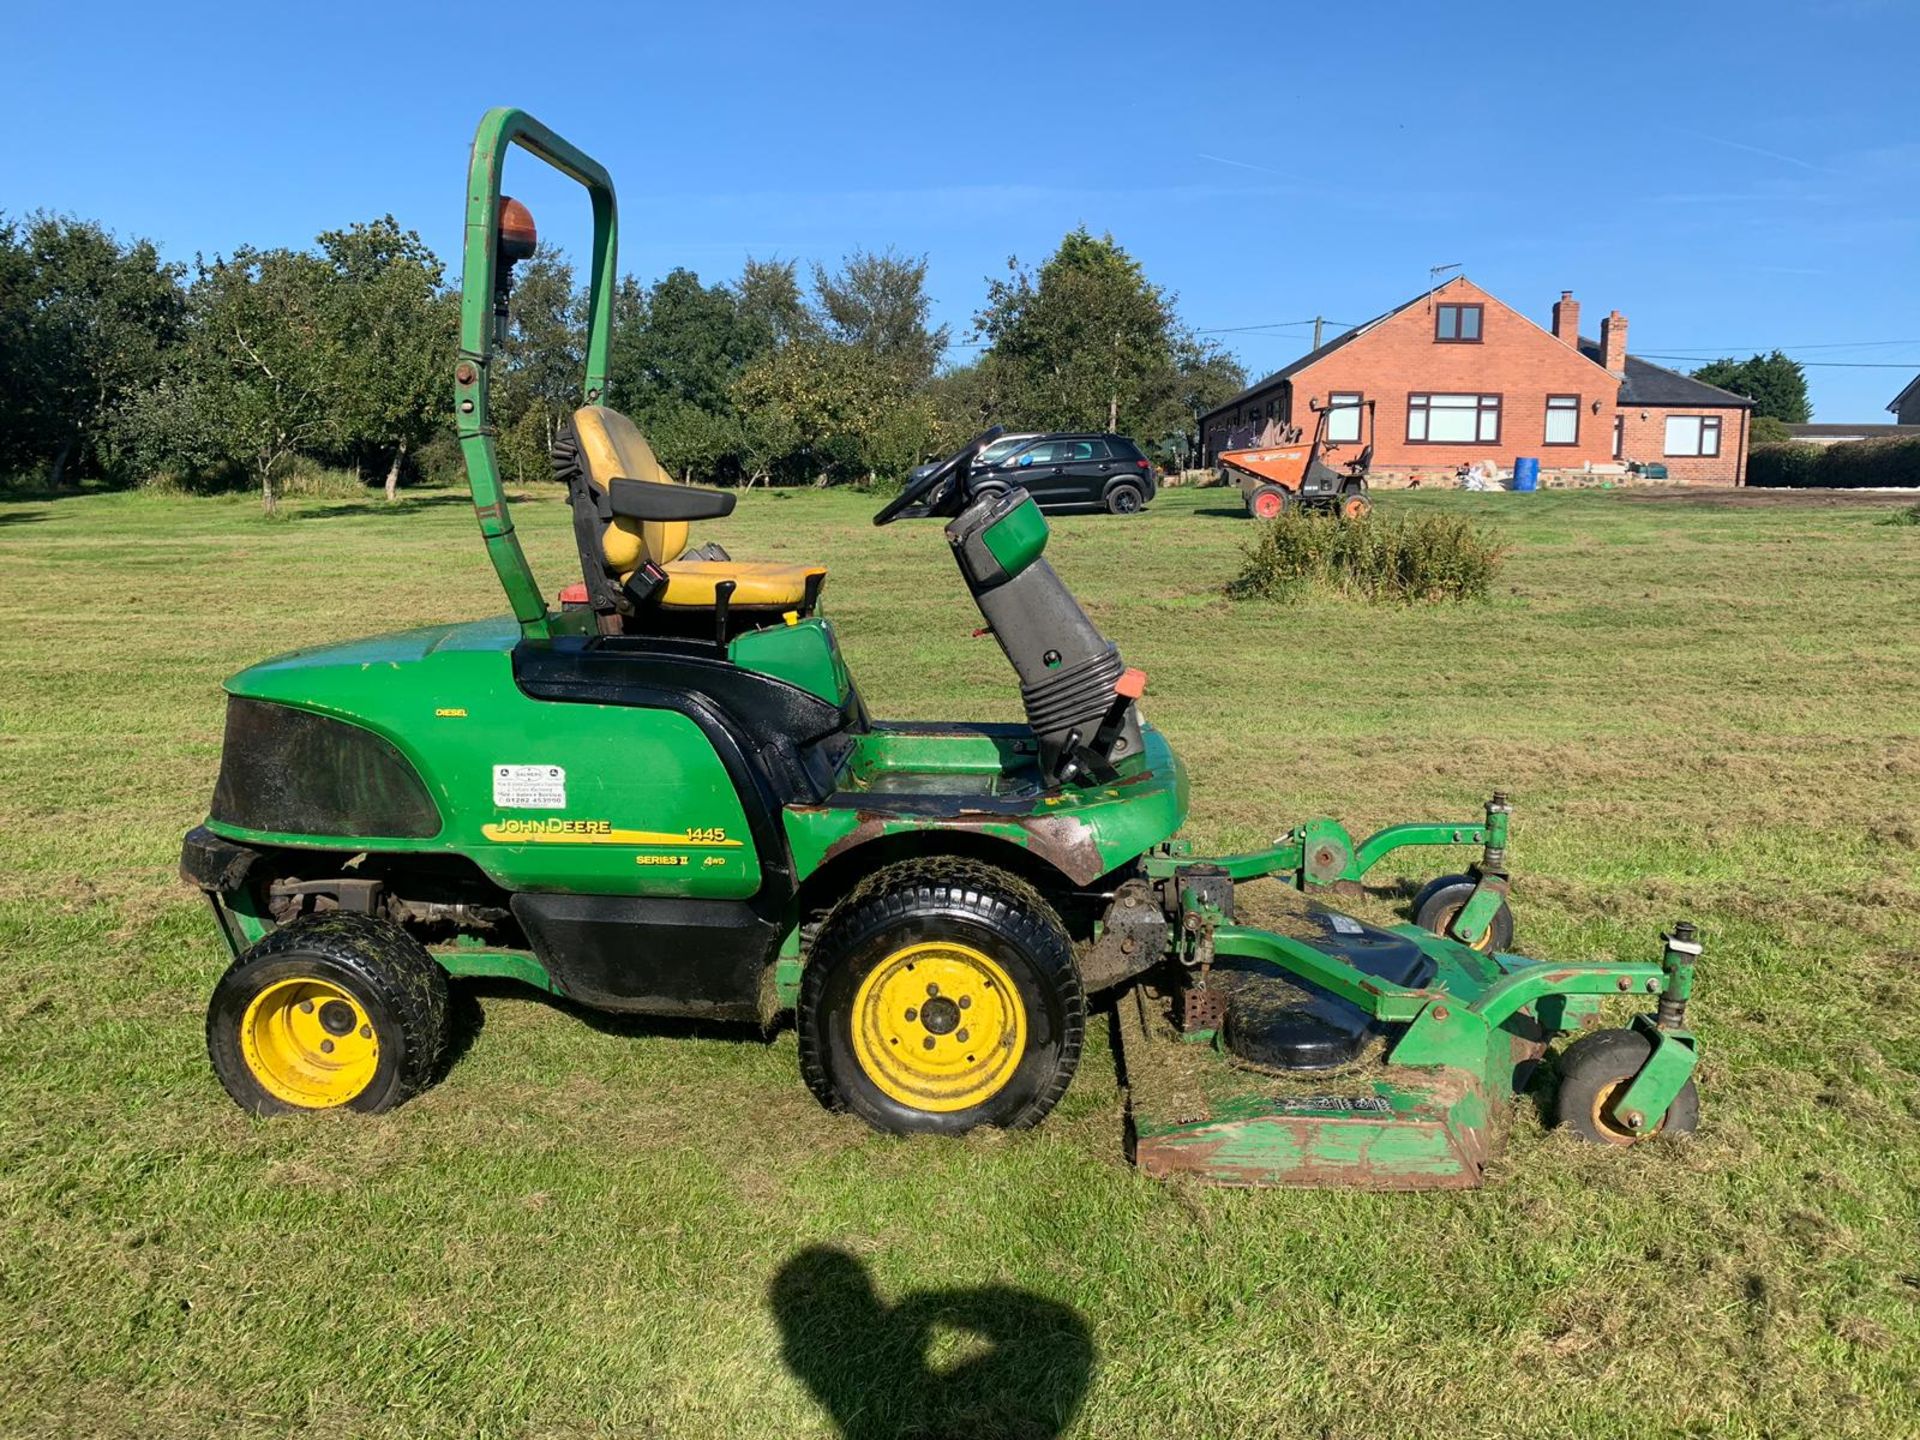 JOHN DEERE 1445 SERIES II 4WD RIDE ON DIESEL LAWN MOWER C/W OUT-FRONT ROTARY CUTTING DECK *PLUS VAT* - Image 3 of 14